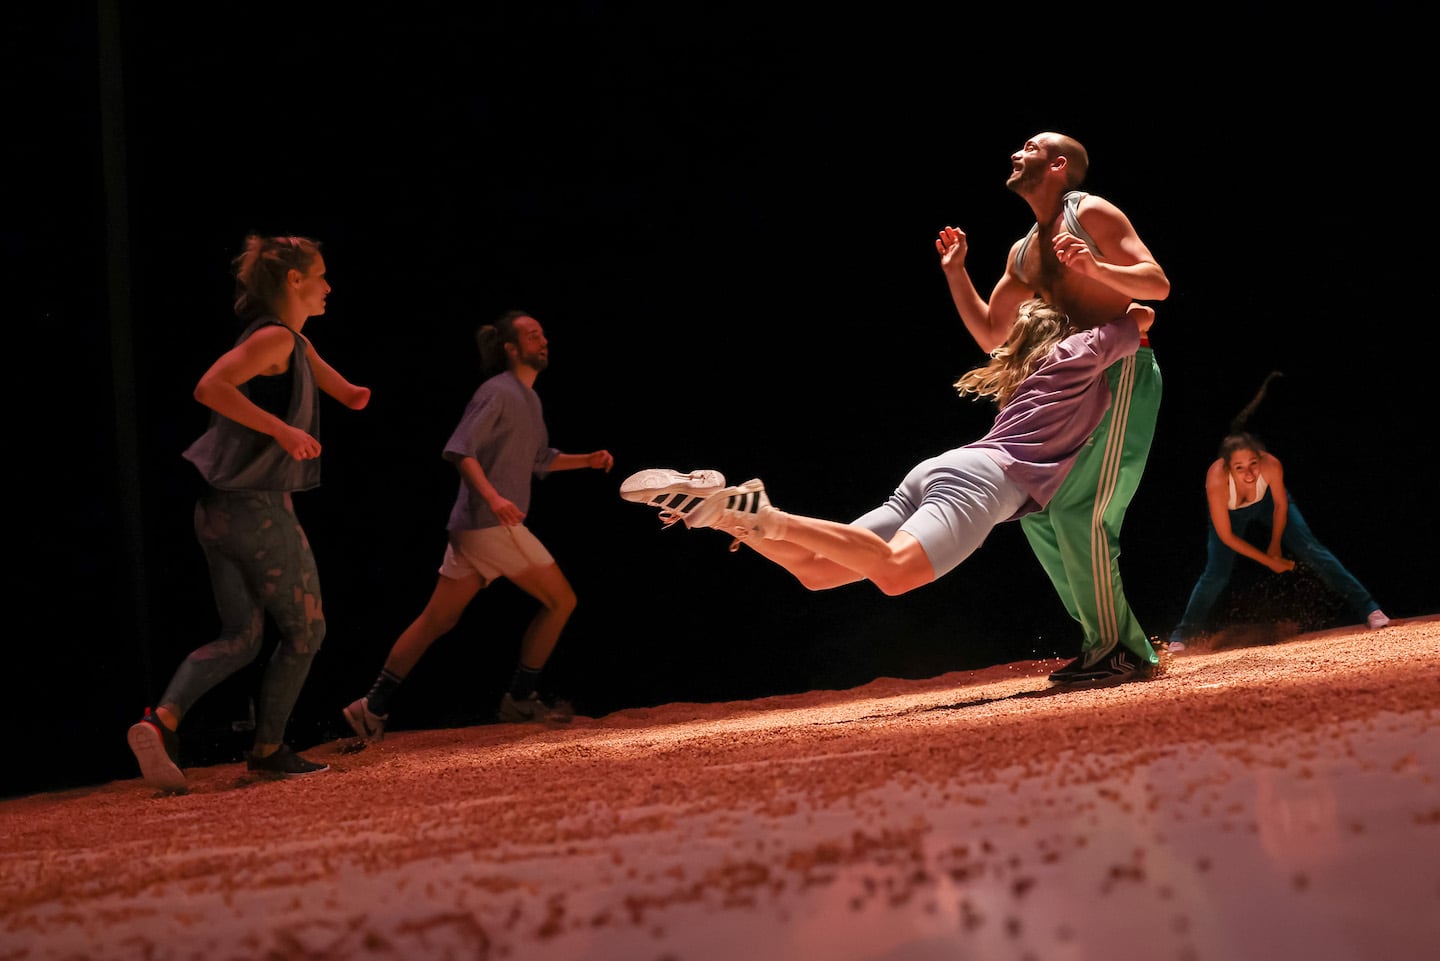 On a tilted floor strewn with reddish grains a woman launches herself headlong and is caught by a man. In the background, other figures are running